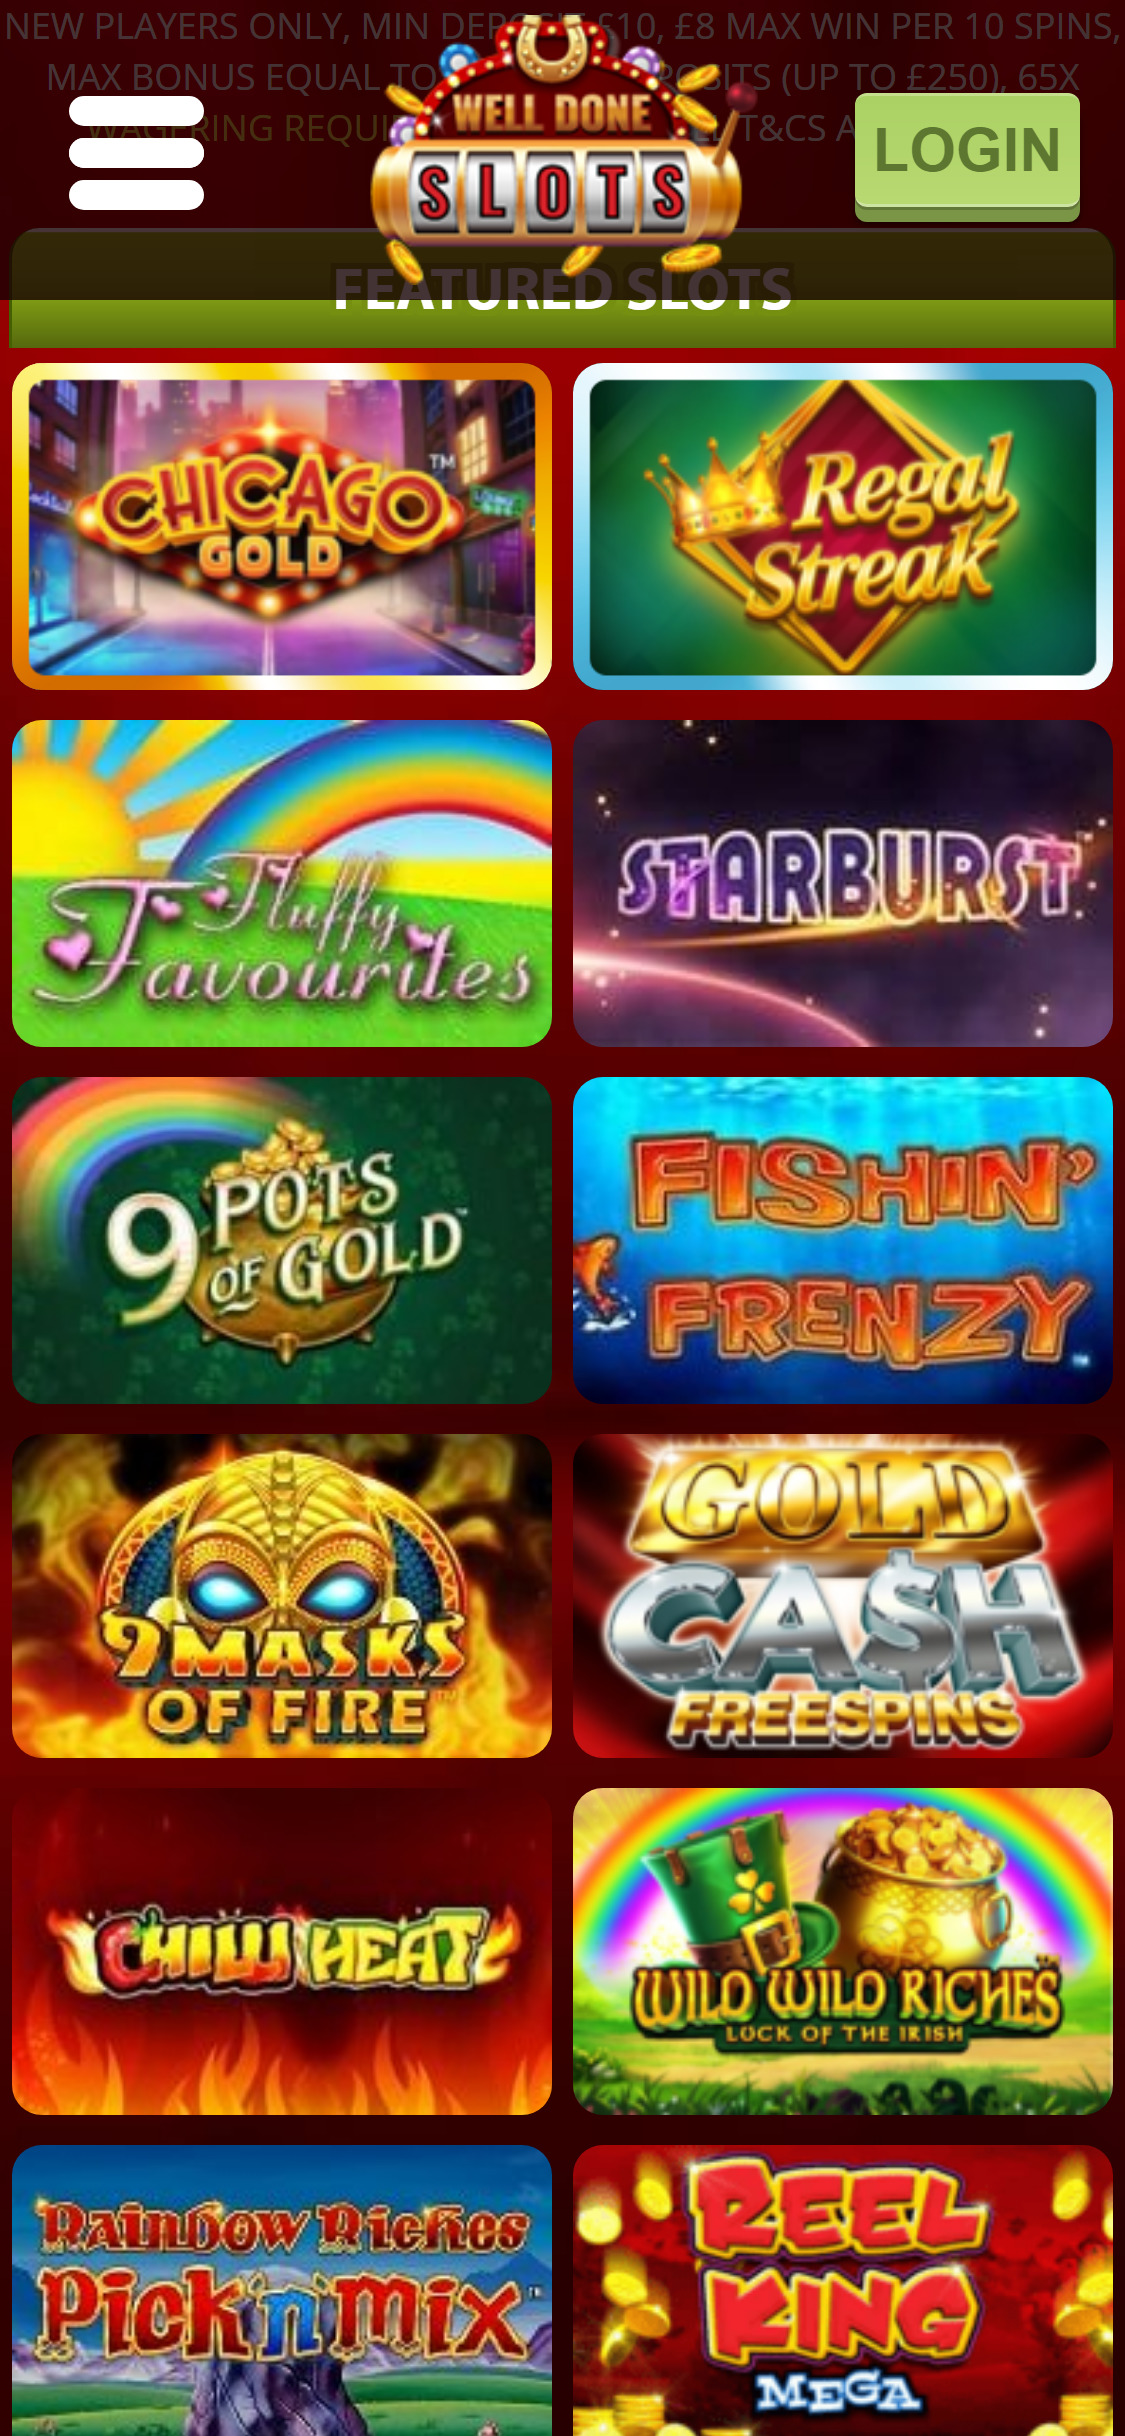 Well Done Slots Casino Mobile Games Review